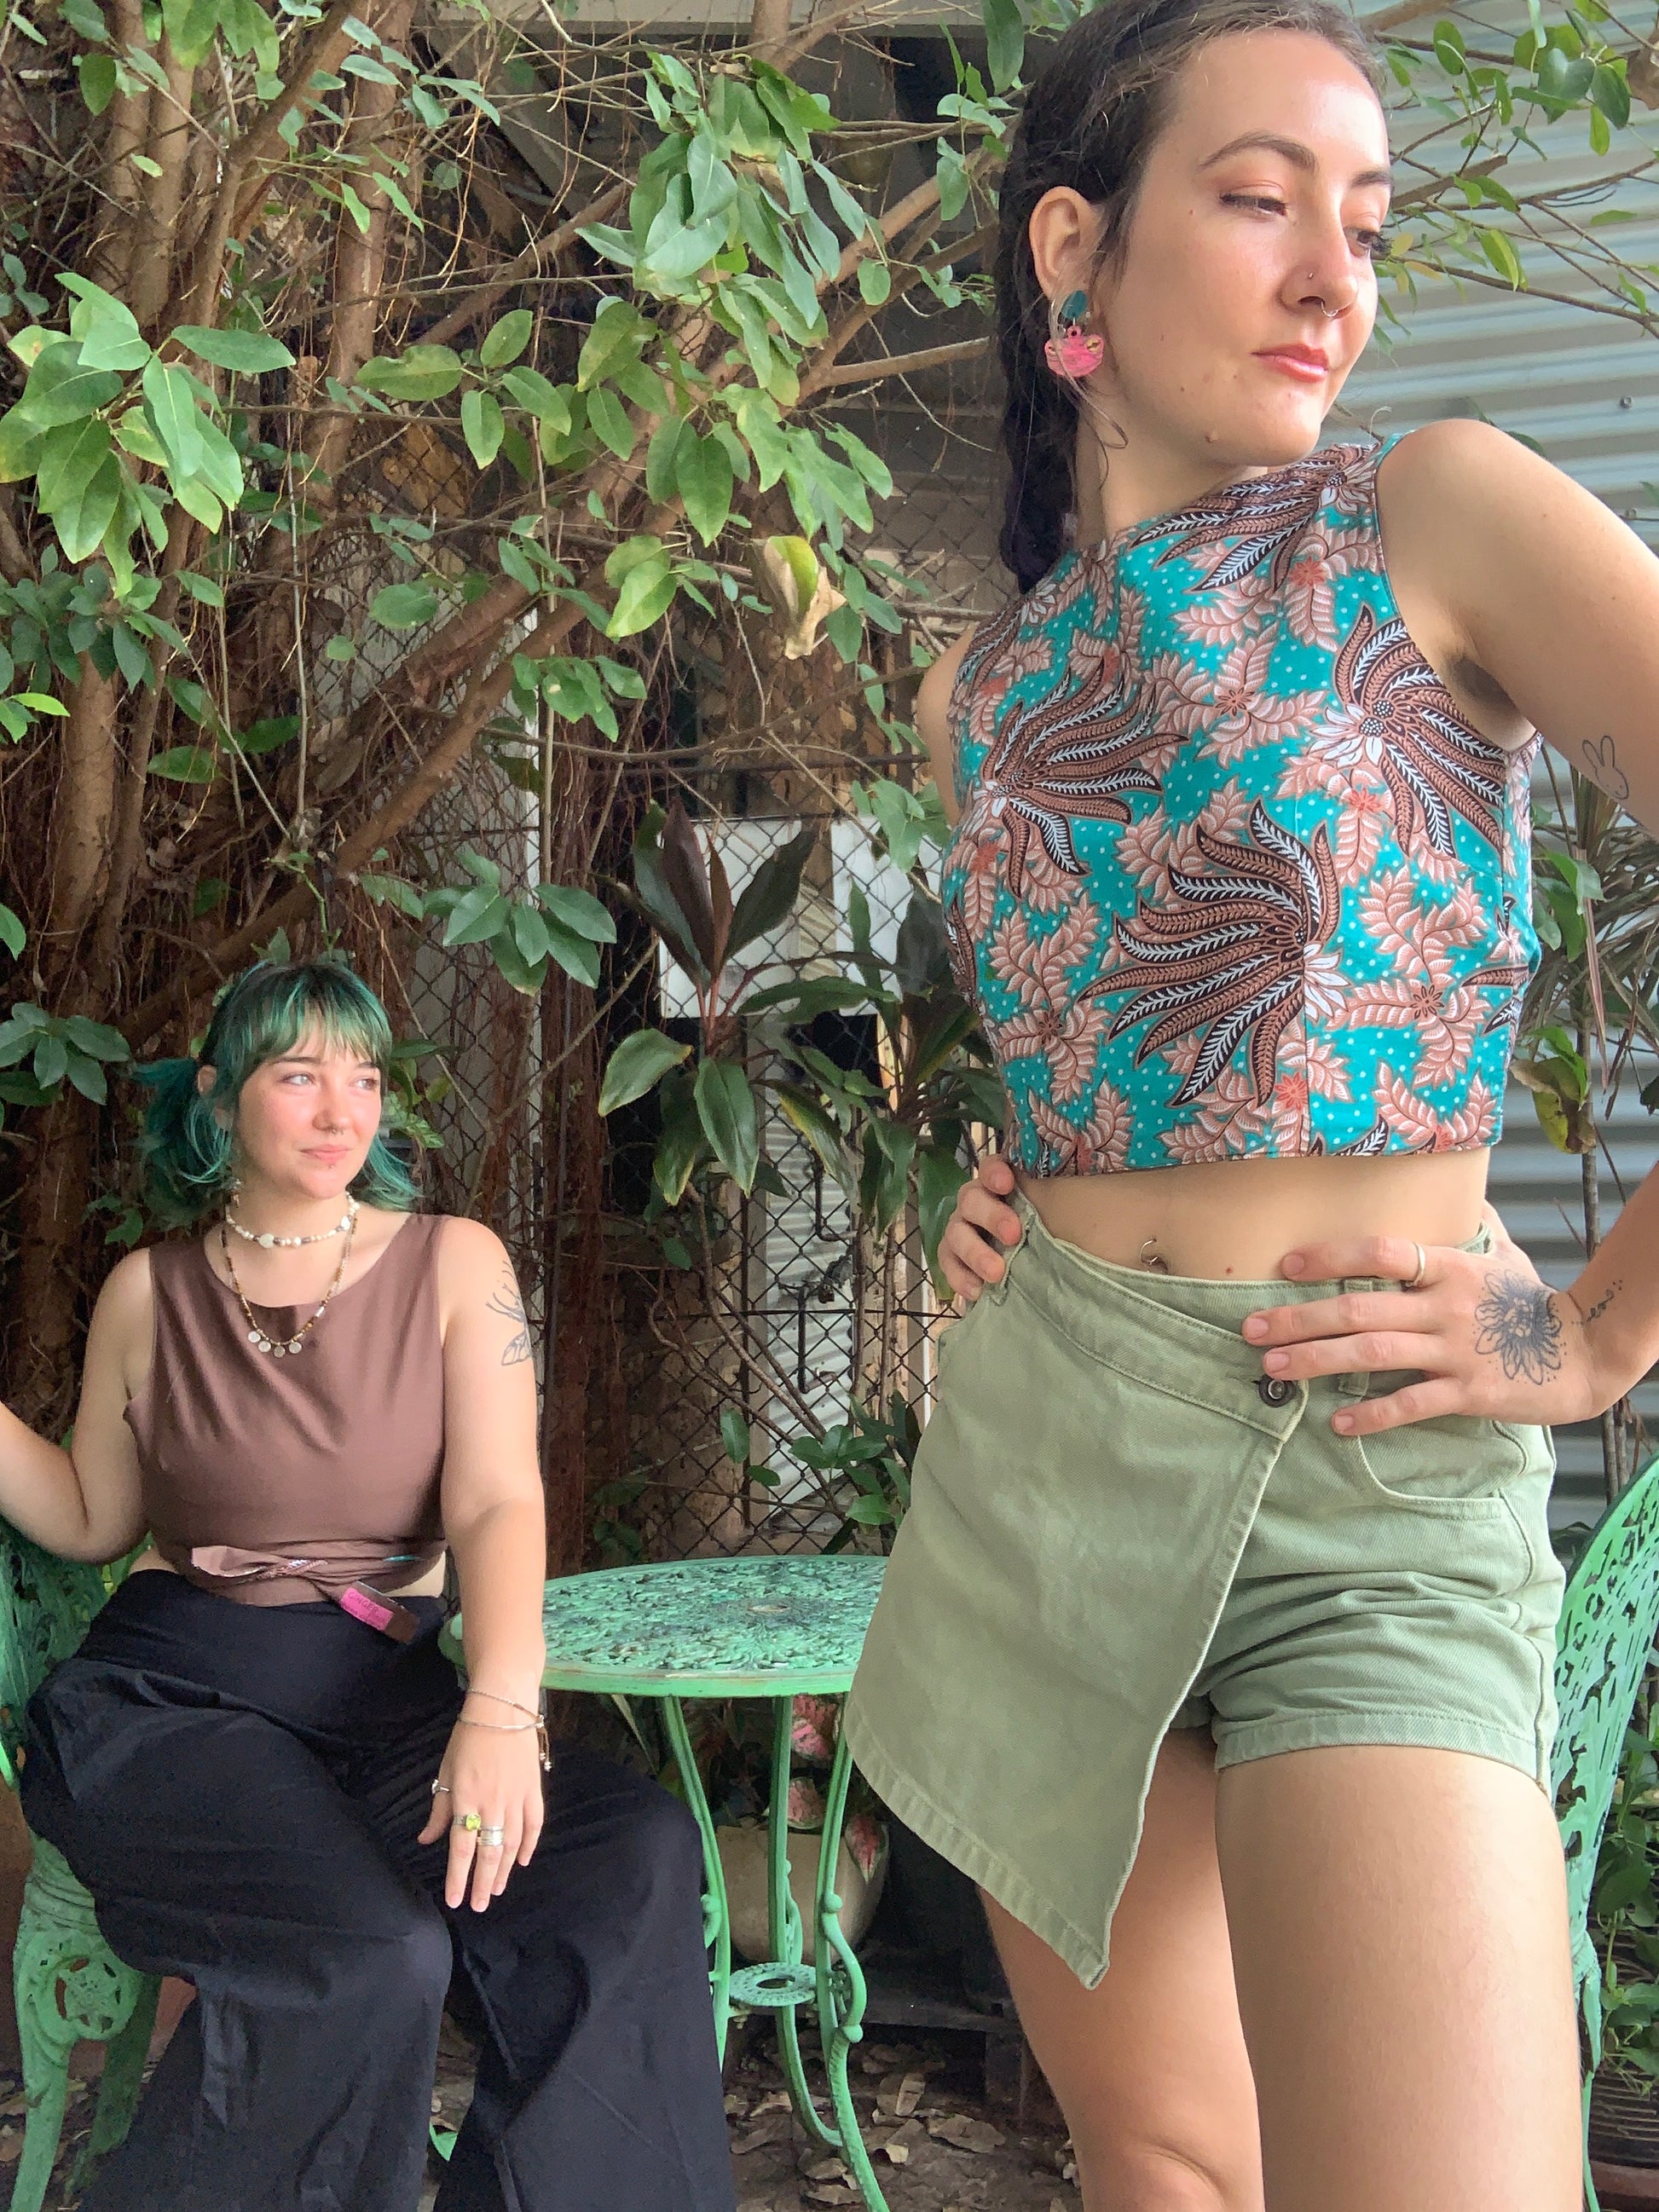 Toucan Top(Reversible) in Turquoise sea grass and dusty brown - Ginger Pink Darwin - ethical fashion - darwin clothing shop - darwin clothing store - darwin fashion